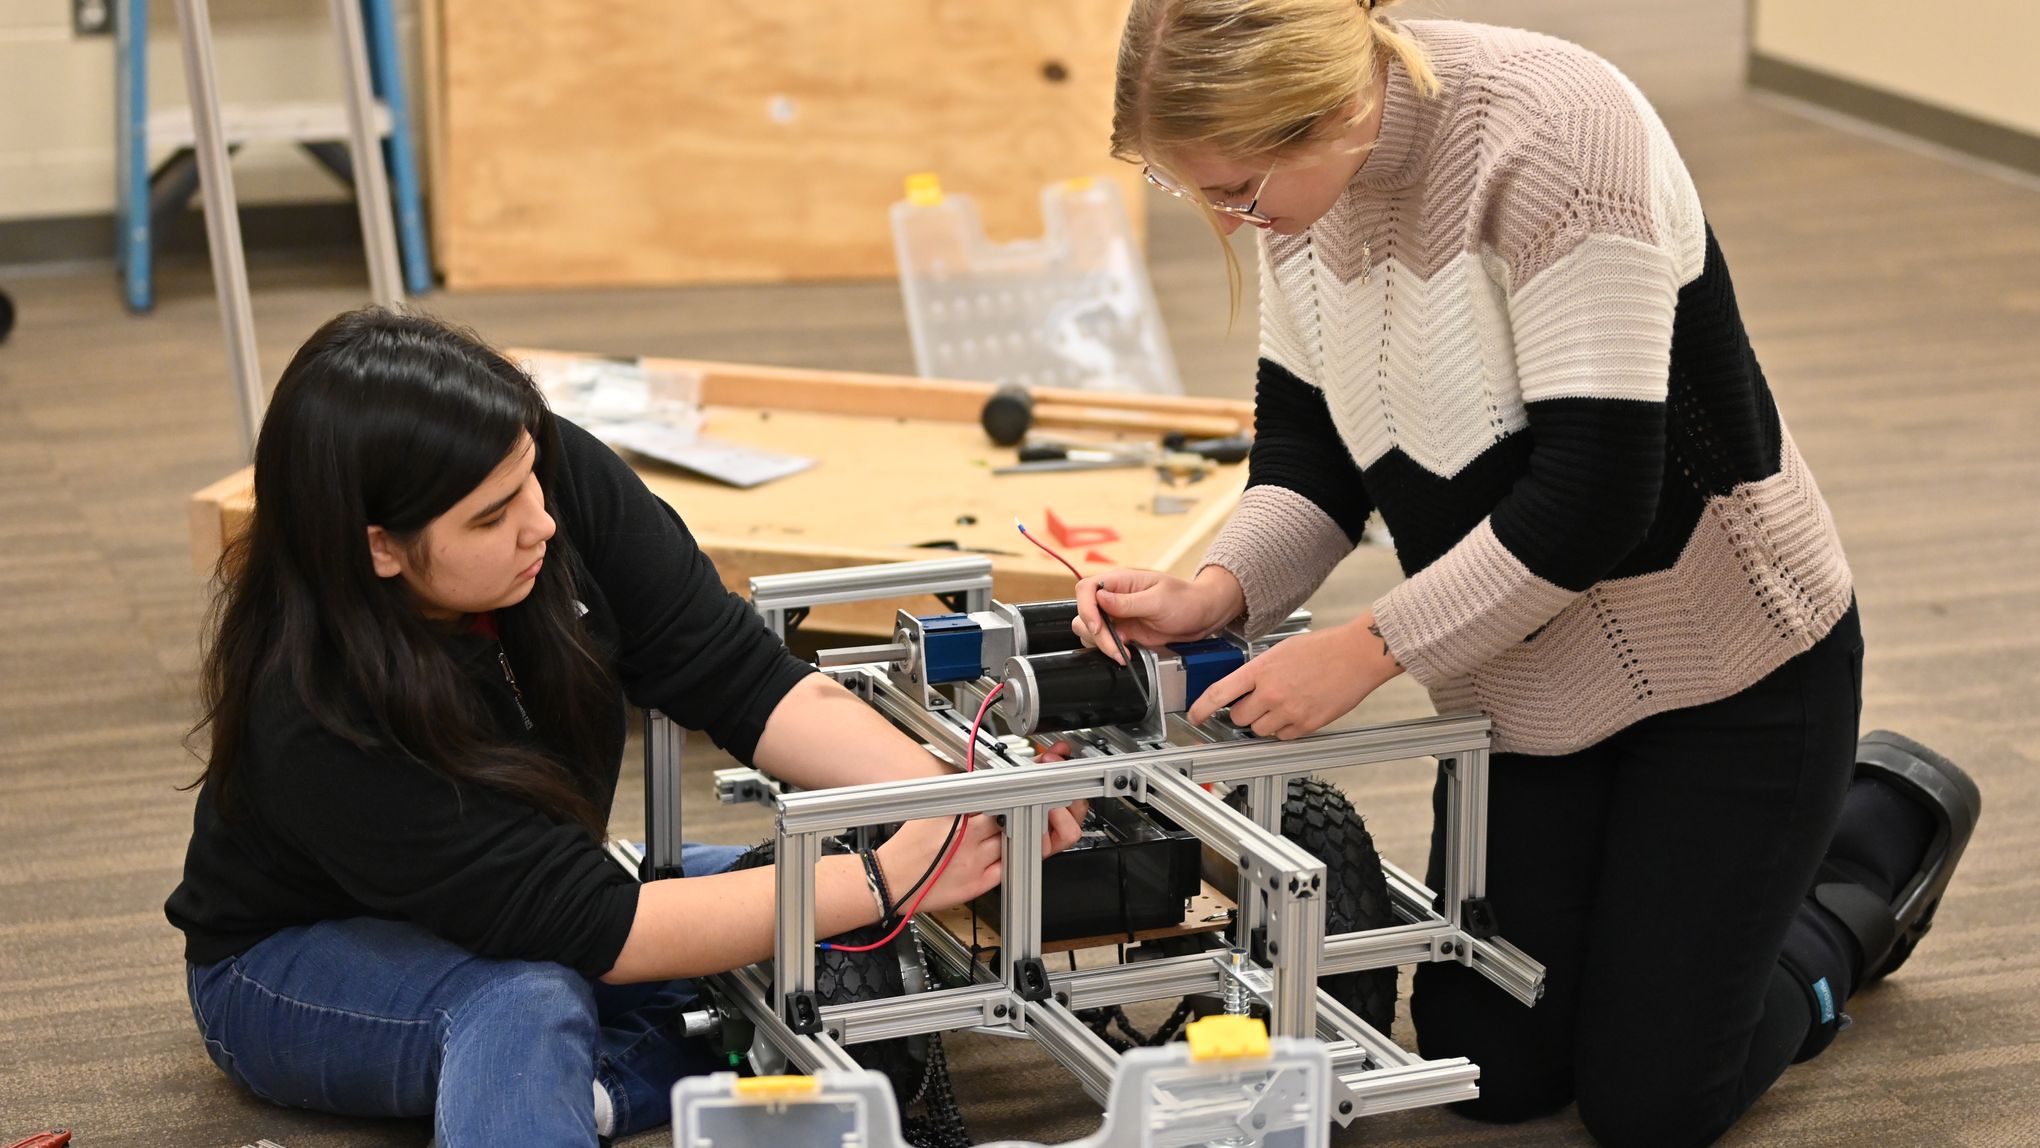 Members working on the robot